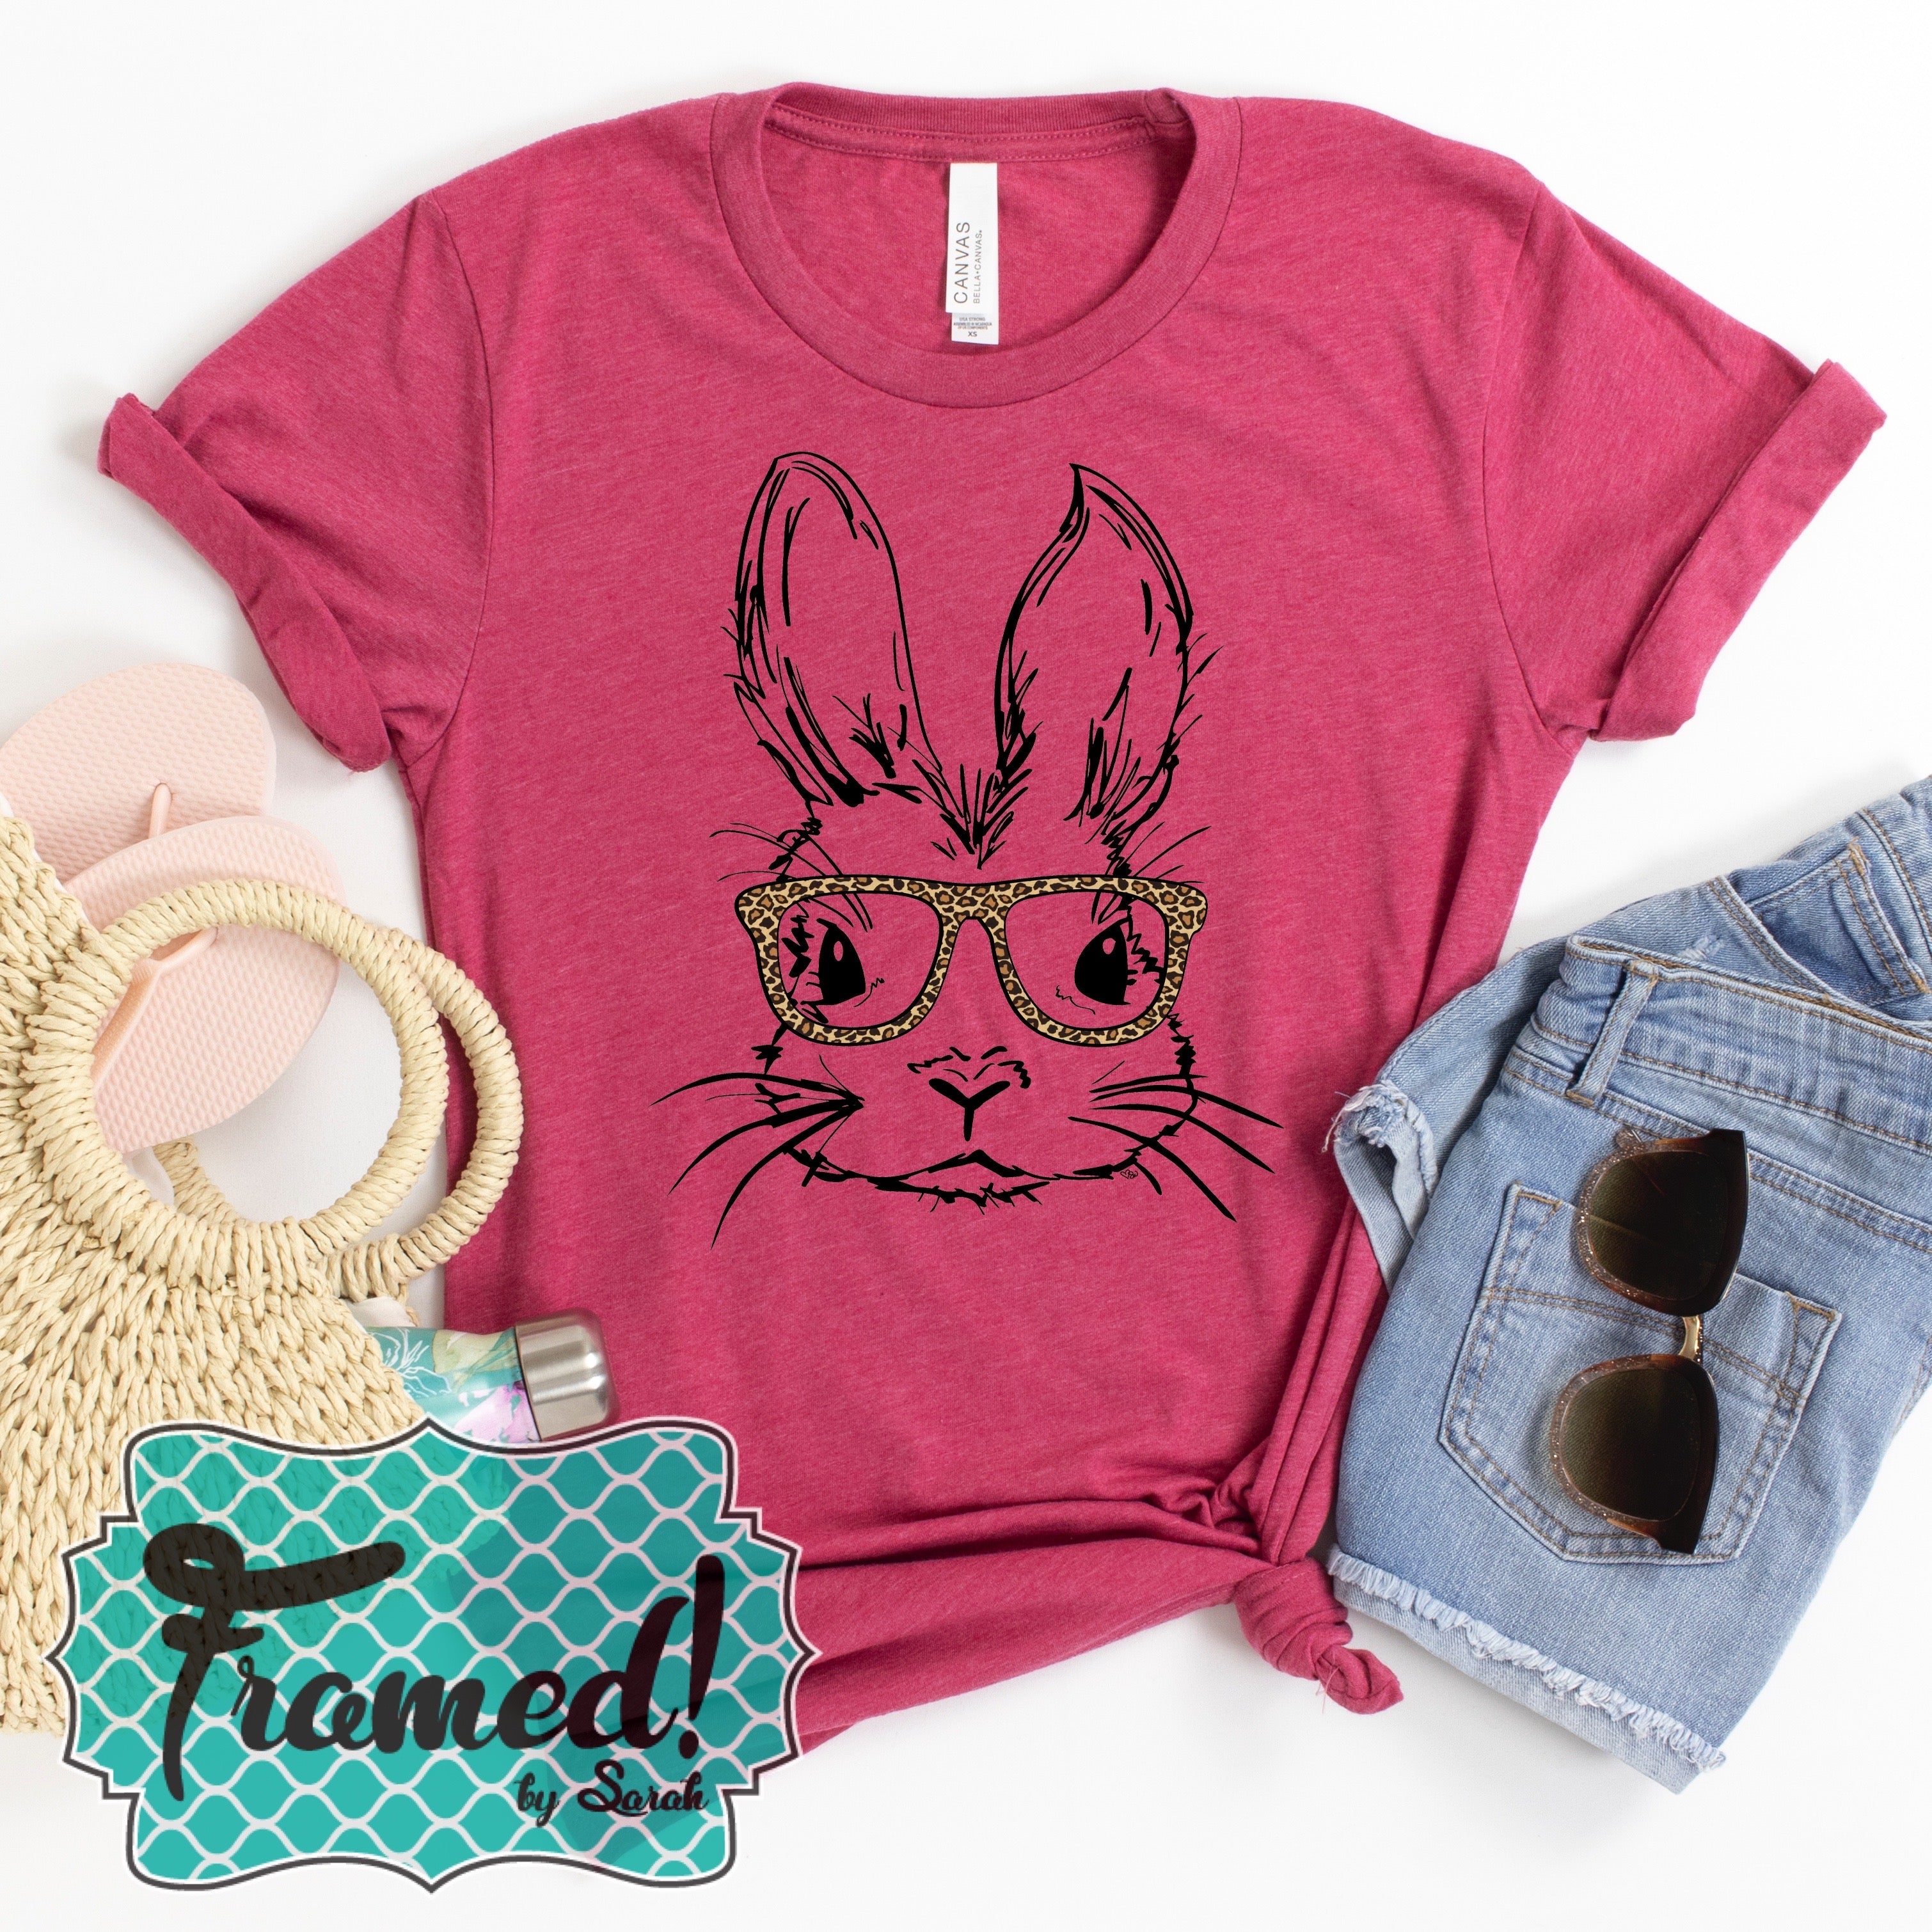 Berry 'Smart Bunny' Tee (Sm, Lg, XL & 3X only)